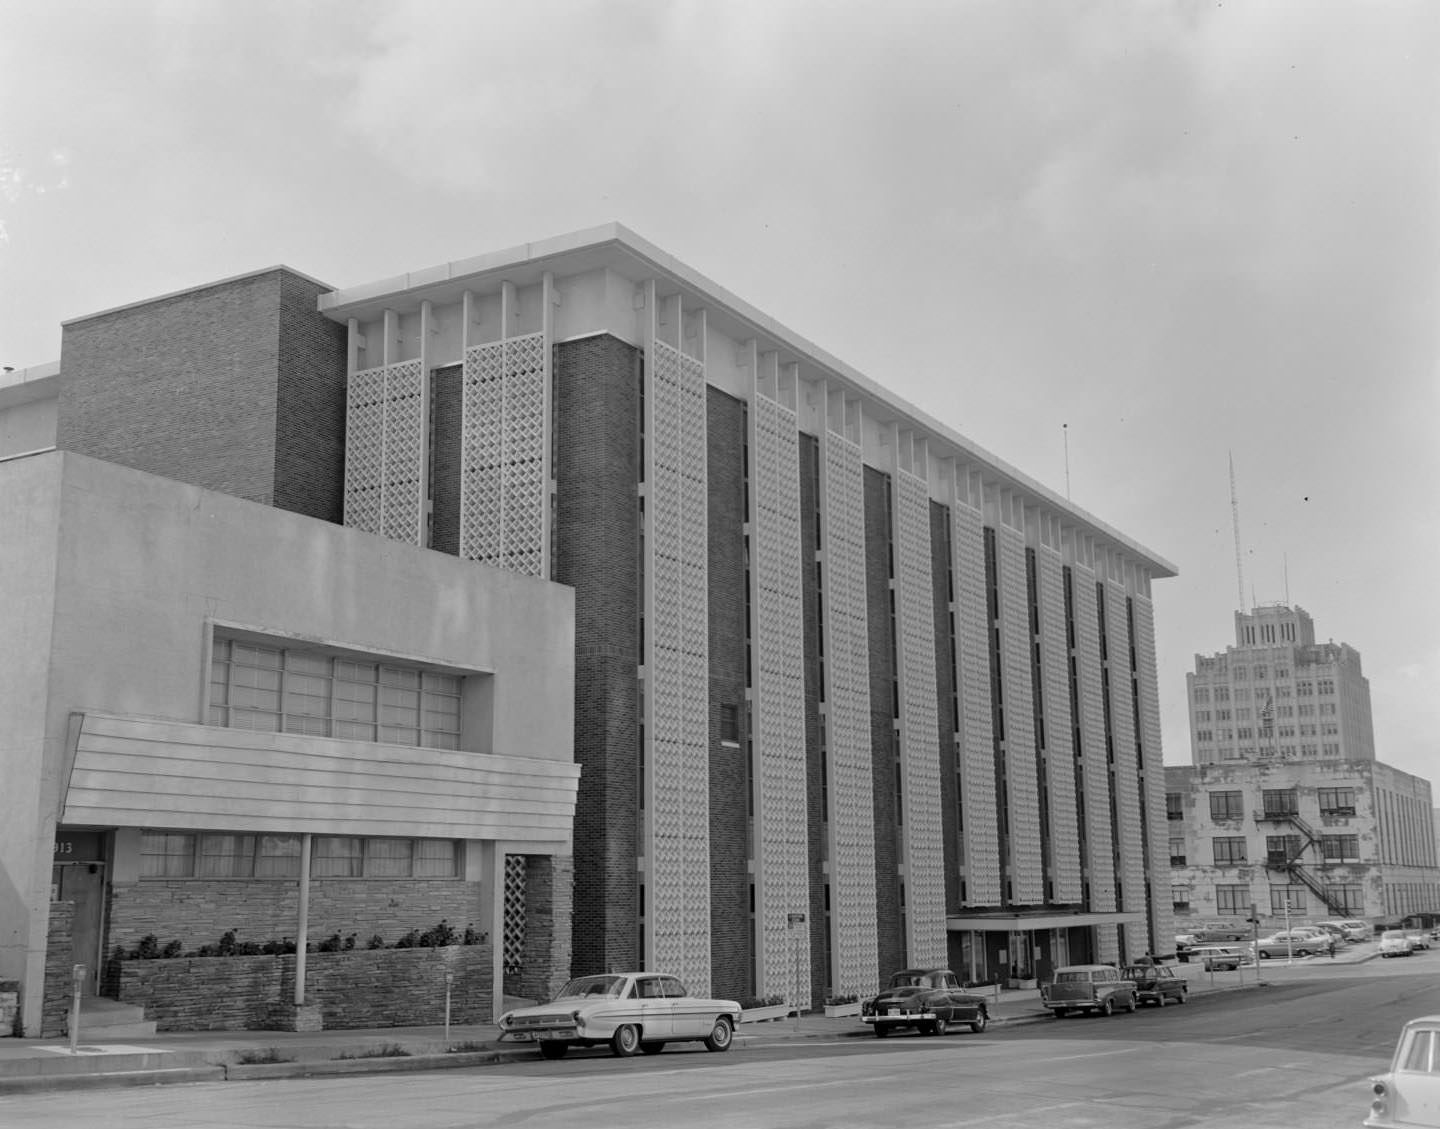 Exterior view of completed building, 1961. Southwestern Bell Telephone building with the Norwood Towers building in the right.